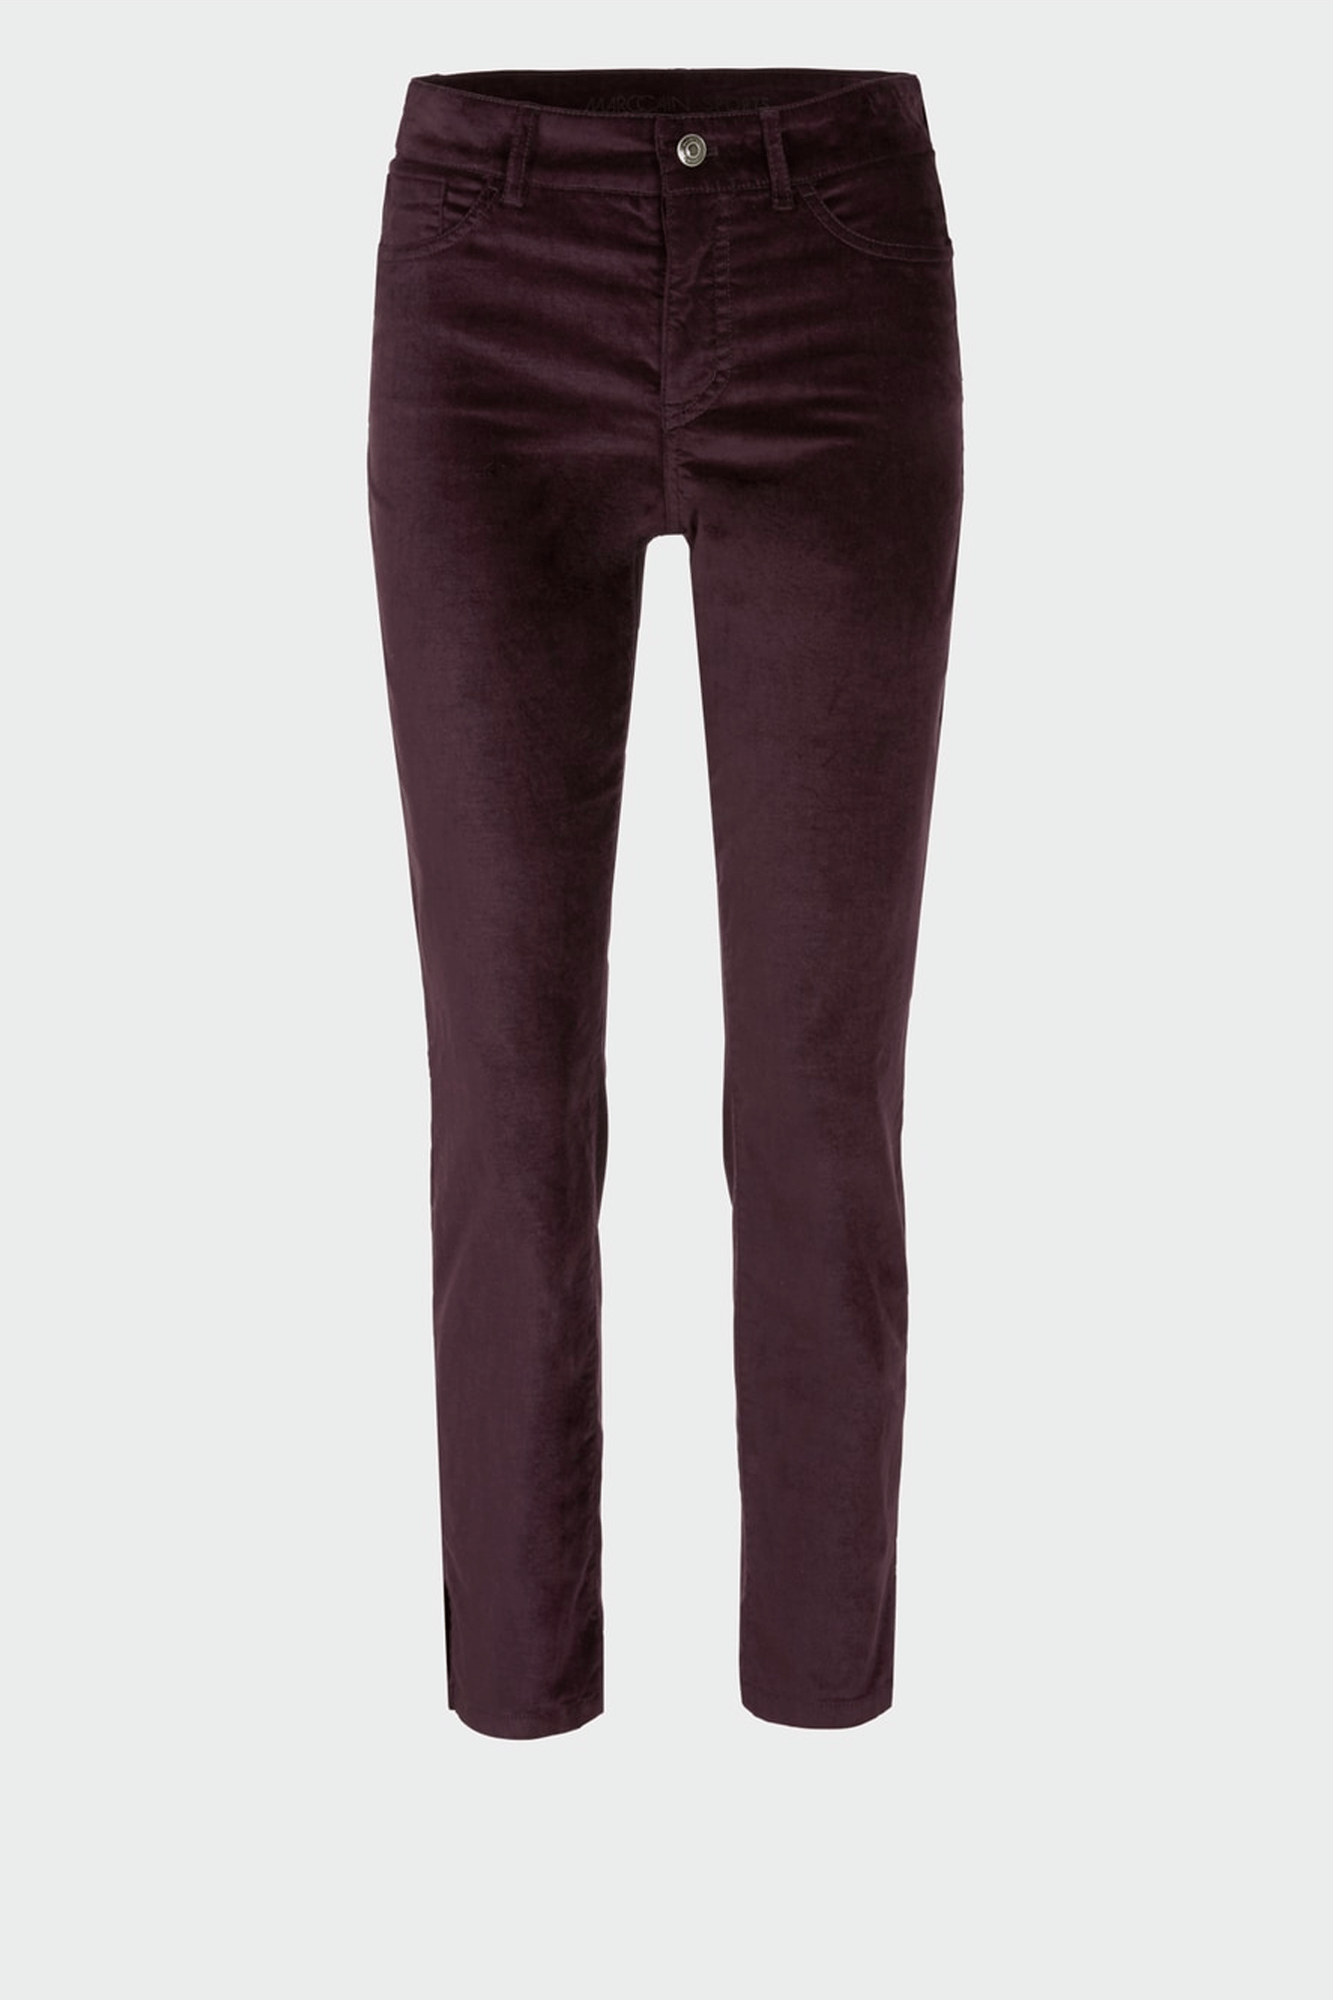 The Mountain Air Slim Fit Pants from Marc Cain combine comfort and style in a sporty and flattering design. Made from soft, elastane-enriched fabric, the 5-pocket pants feature side slits at the hem and a regular-length waistband. The 7/8 length makes for a sleek and slim fit. Wear the pants with confidence with a zip and button fastening.